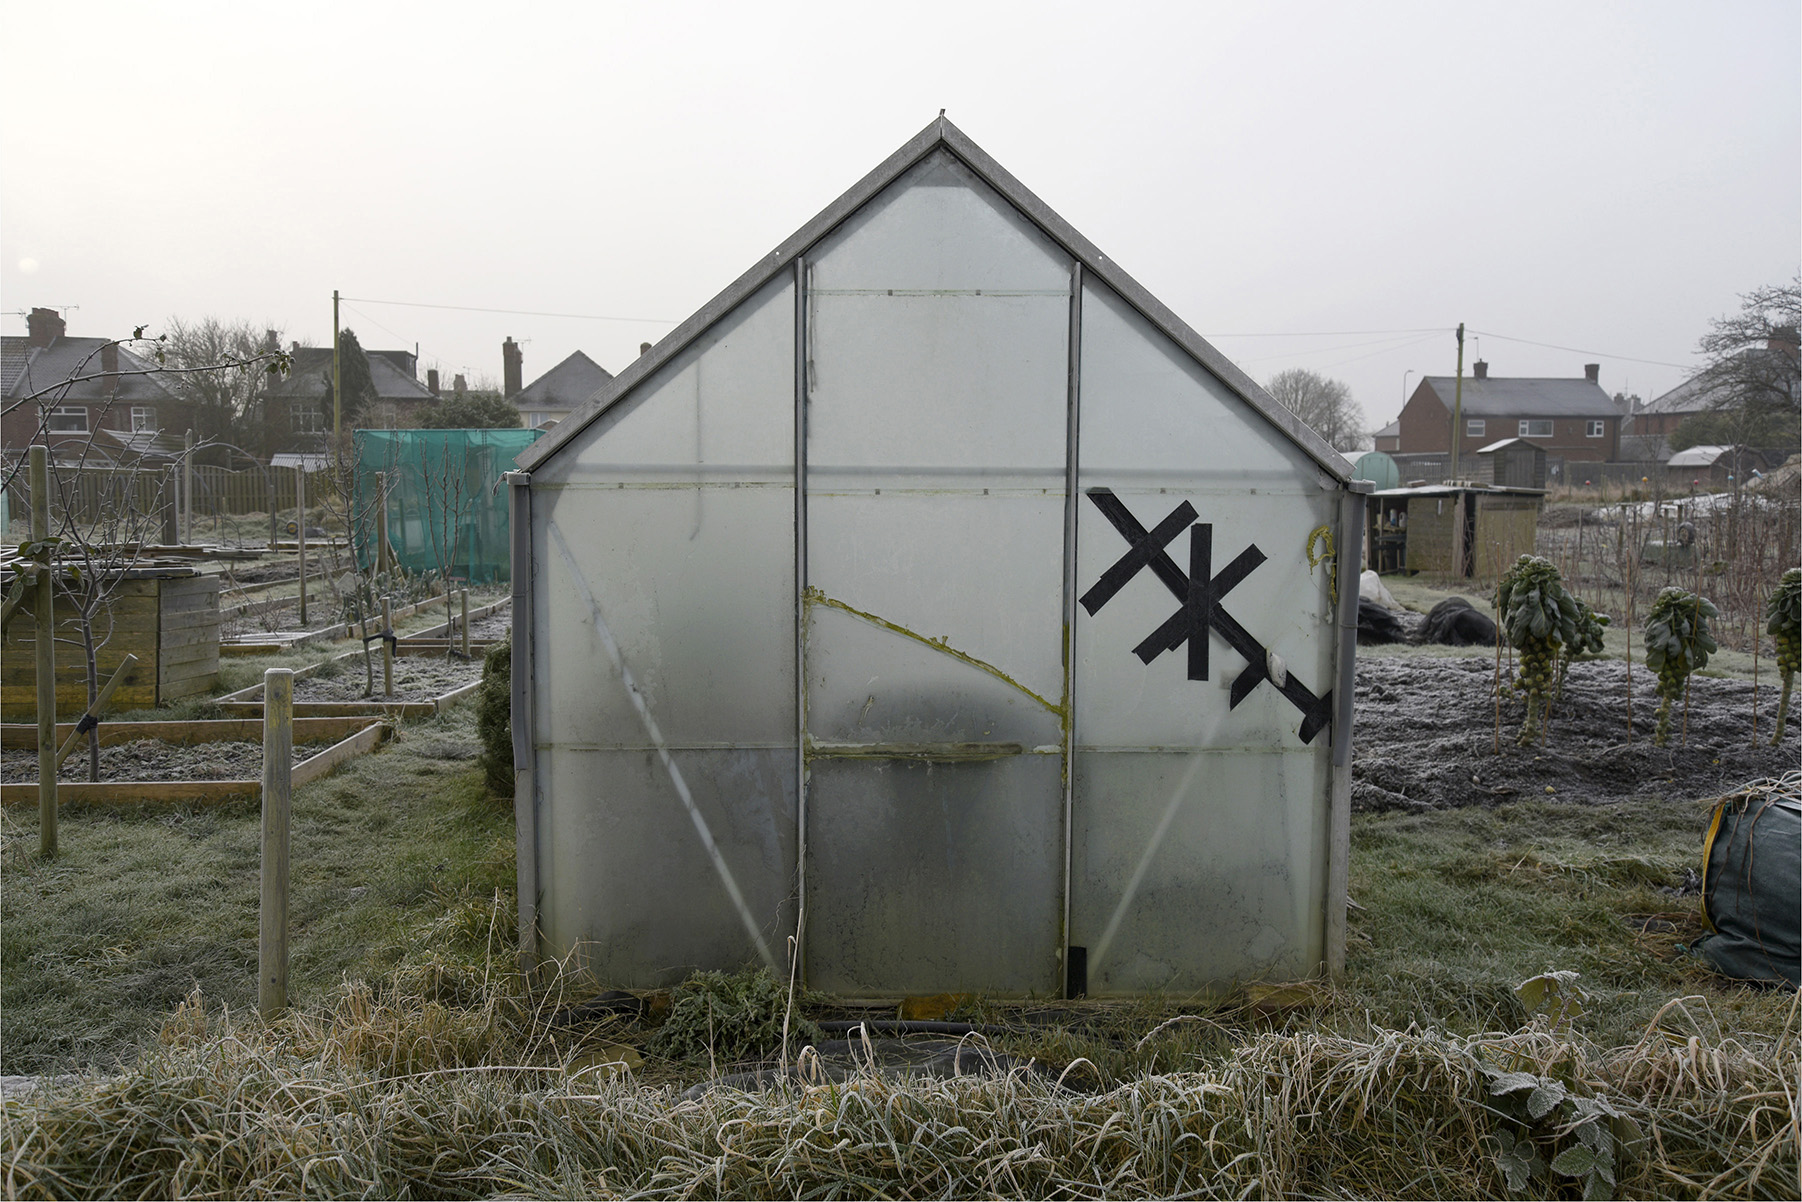 Lesley Farrell, Greenhouse, from the series Allotment Architecture, 2017